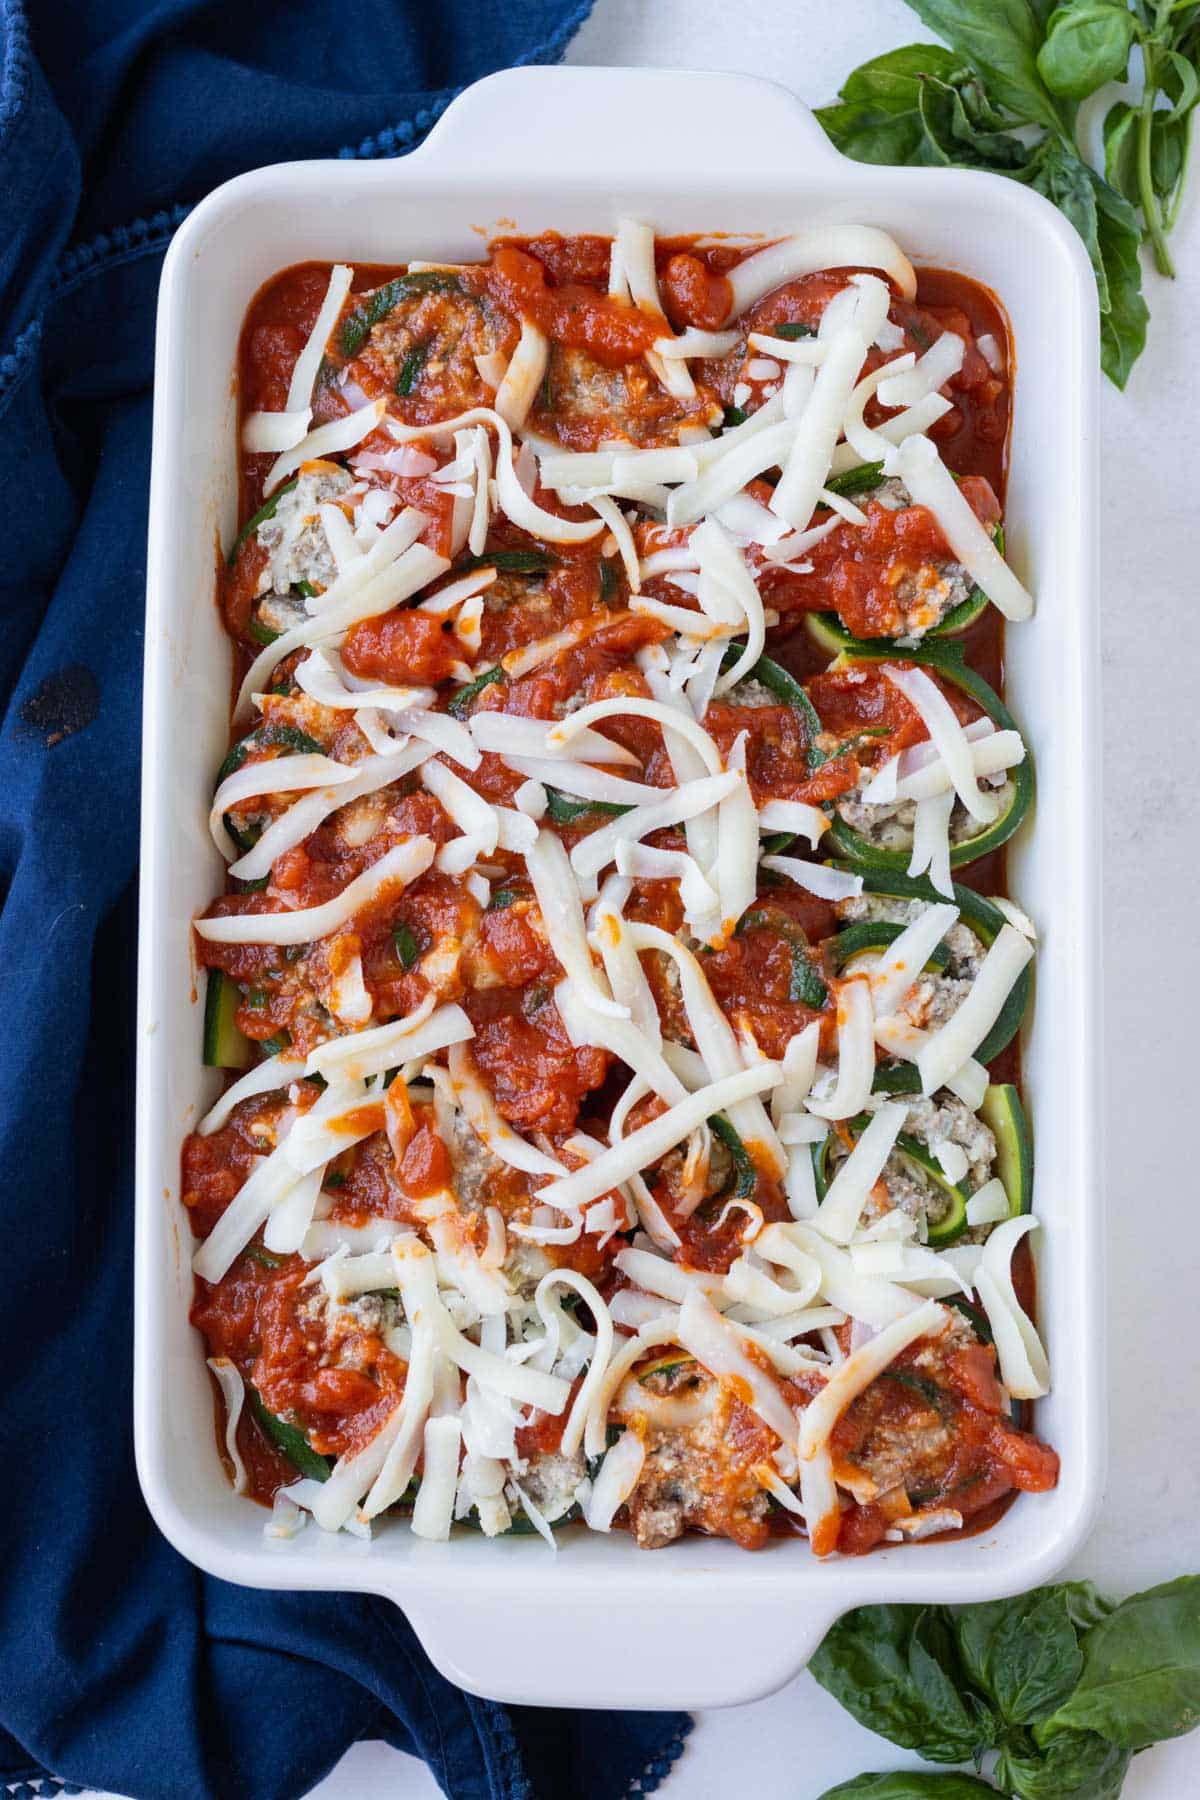 Cheese is sprinkled on top of the rolled zucchini lasagna.